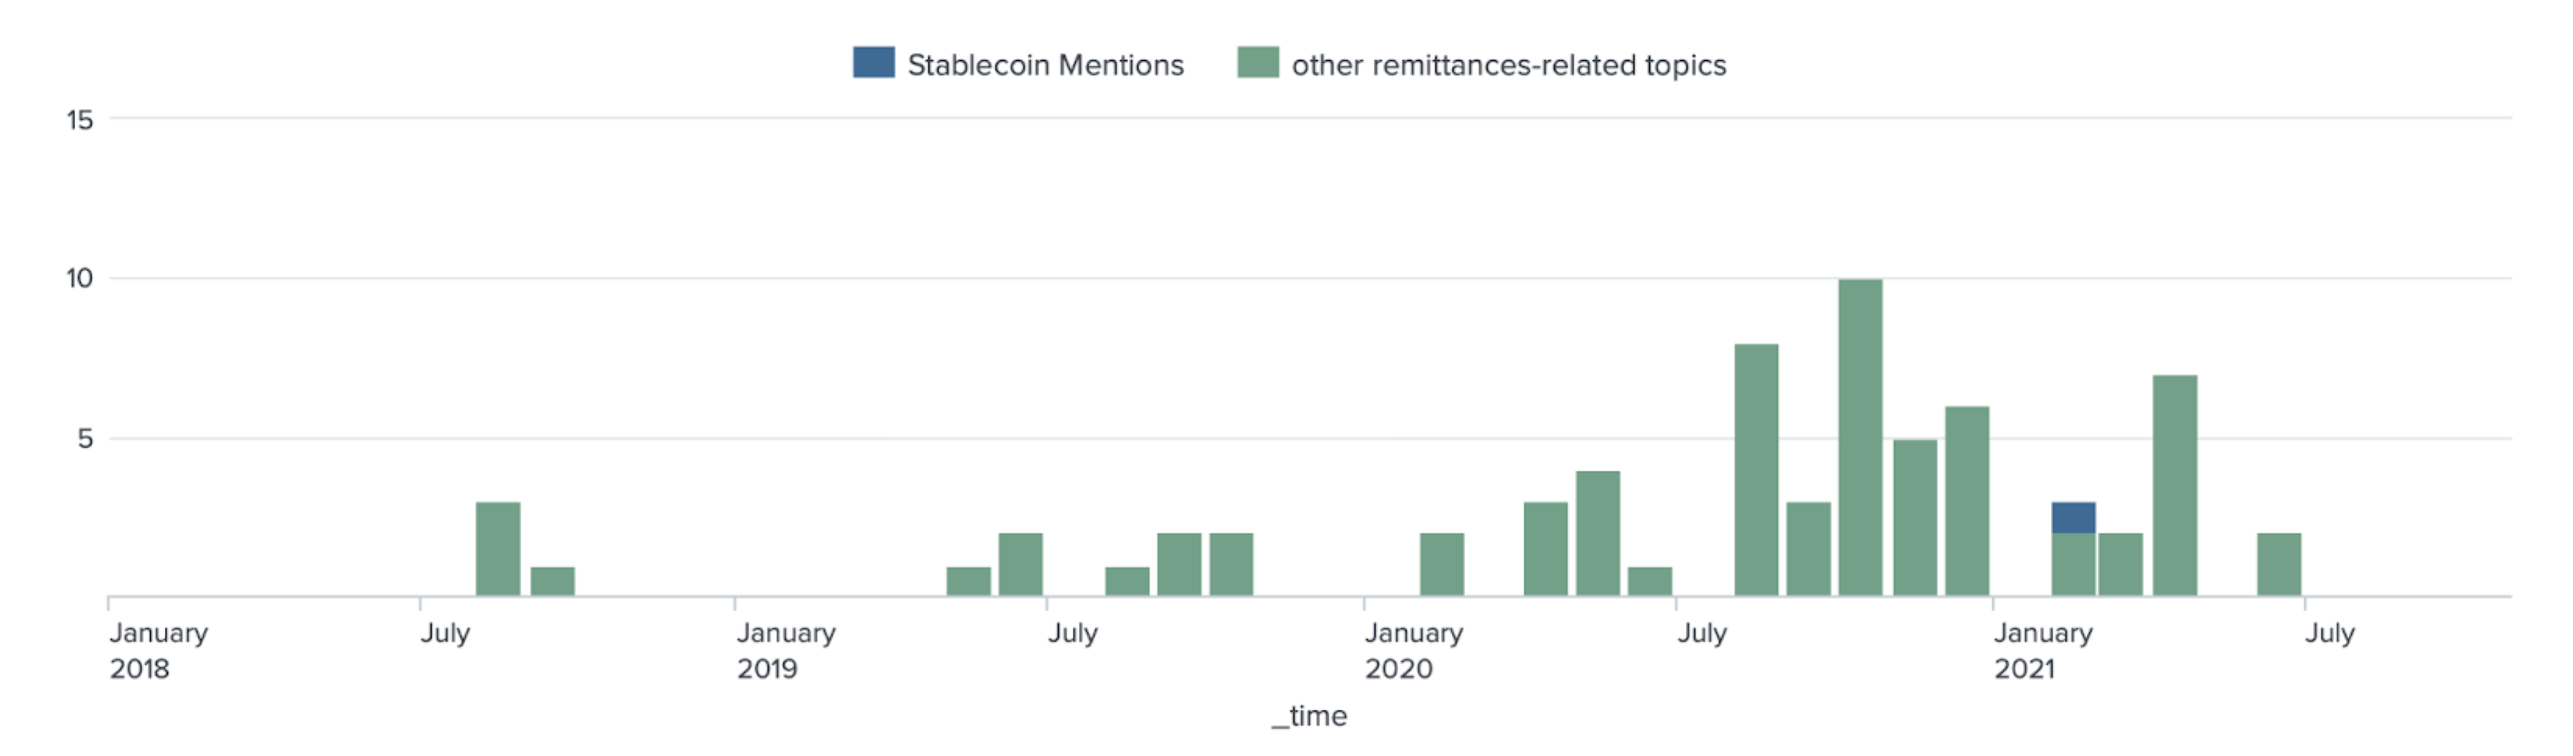 Stablecoins mentions within remittances-related discussions on Reddit